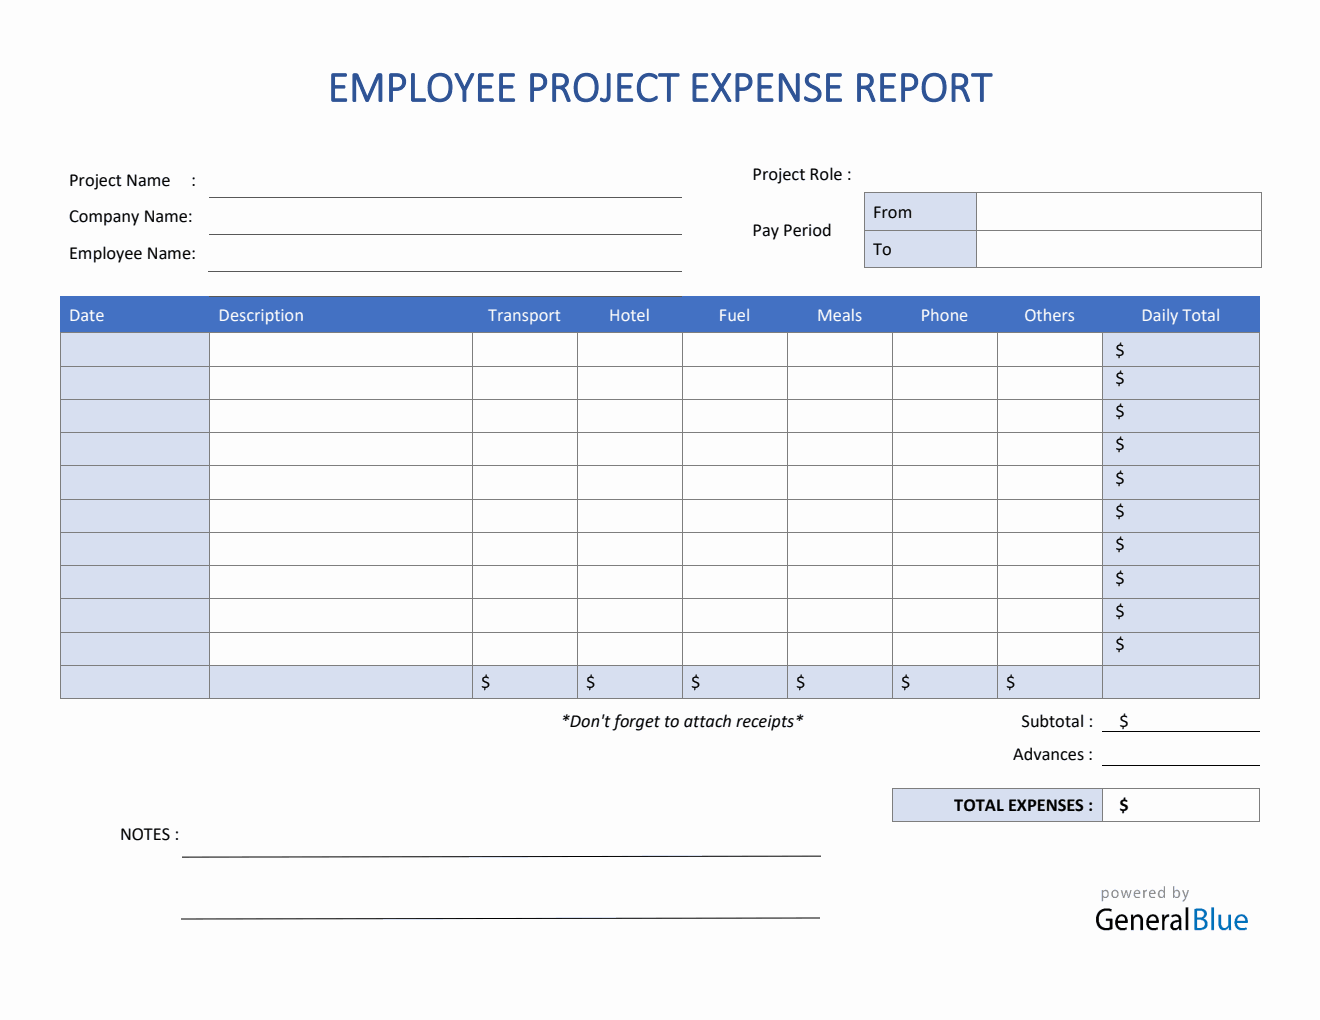 Employee Project Expense Report Template in Word